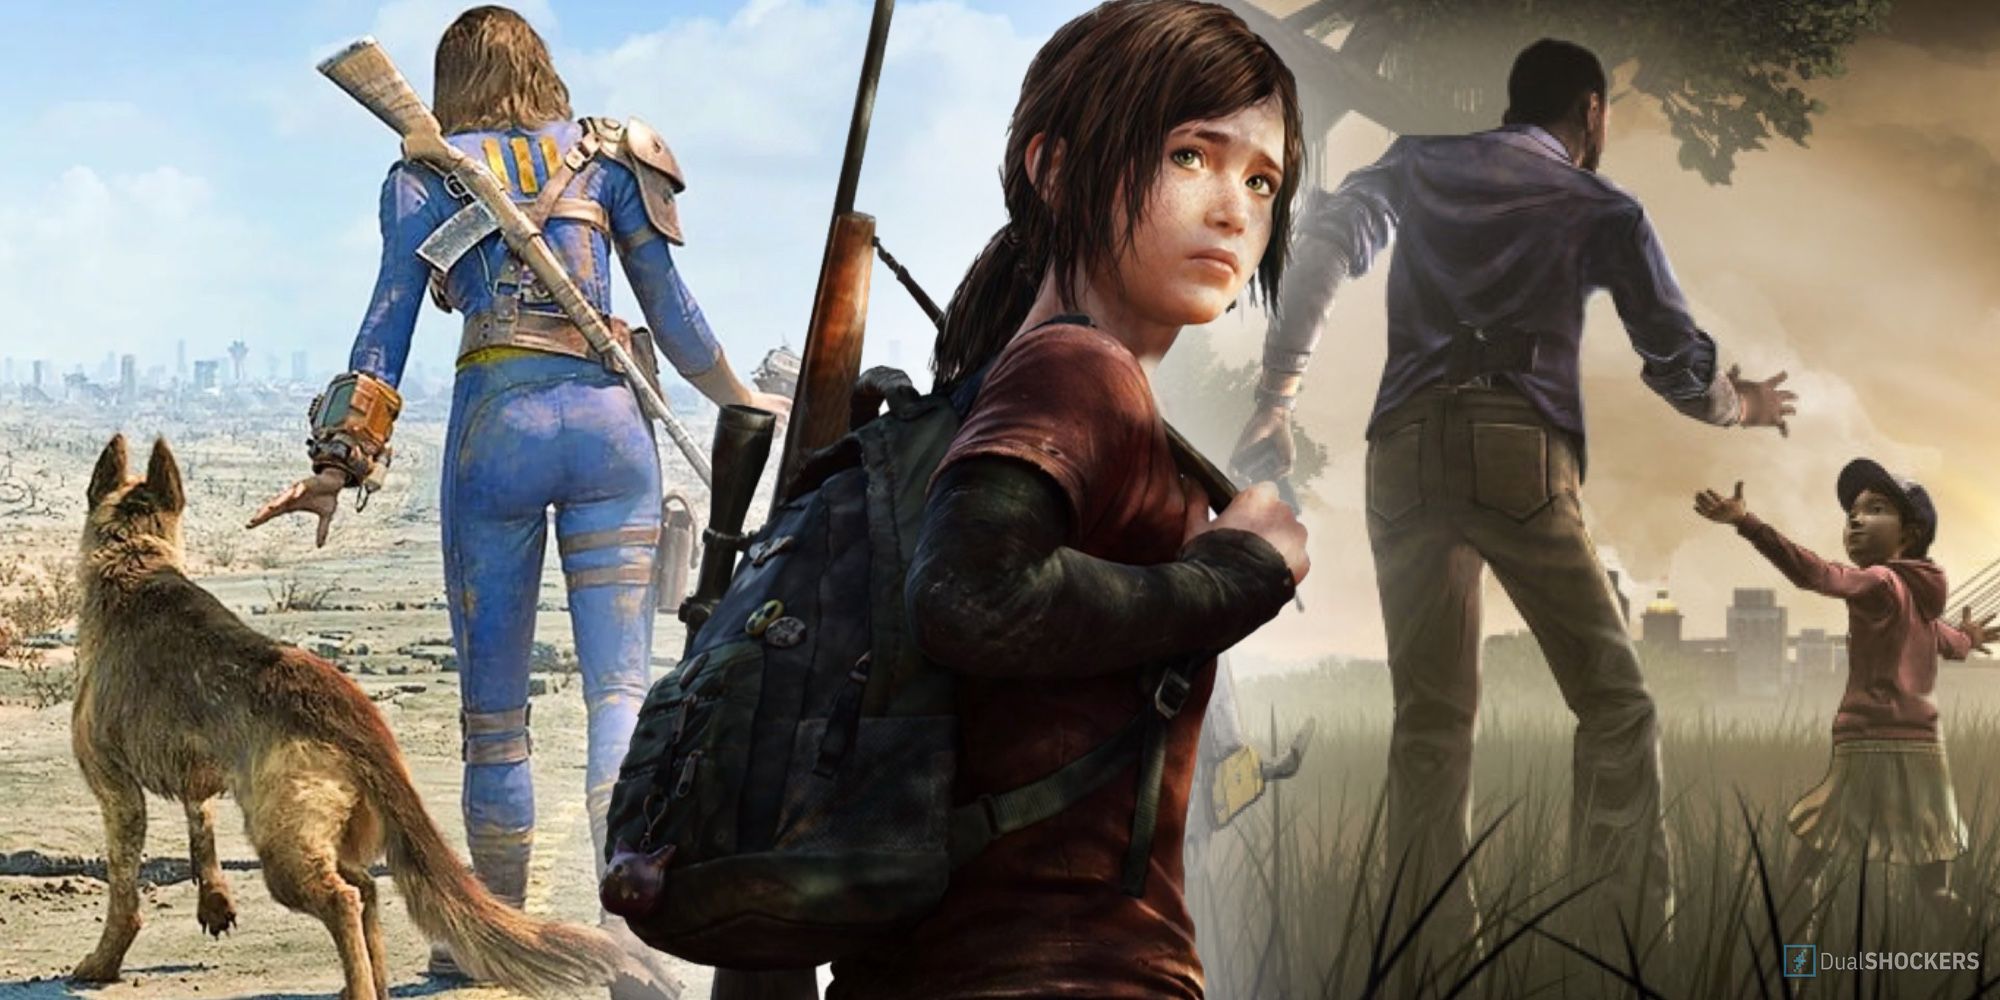 Best Post Apocalyptic Games, Fallout, Last Of Us, Walking Dead